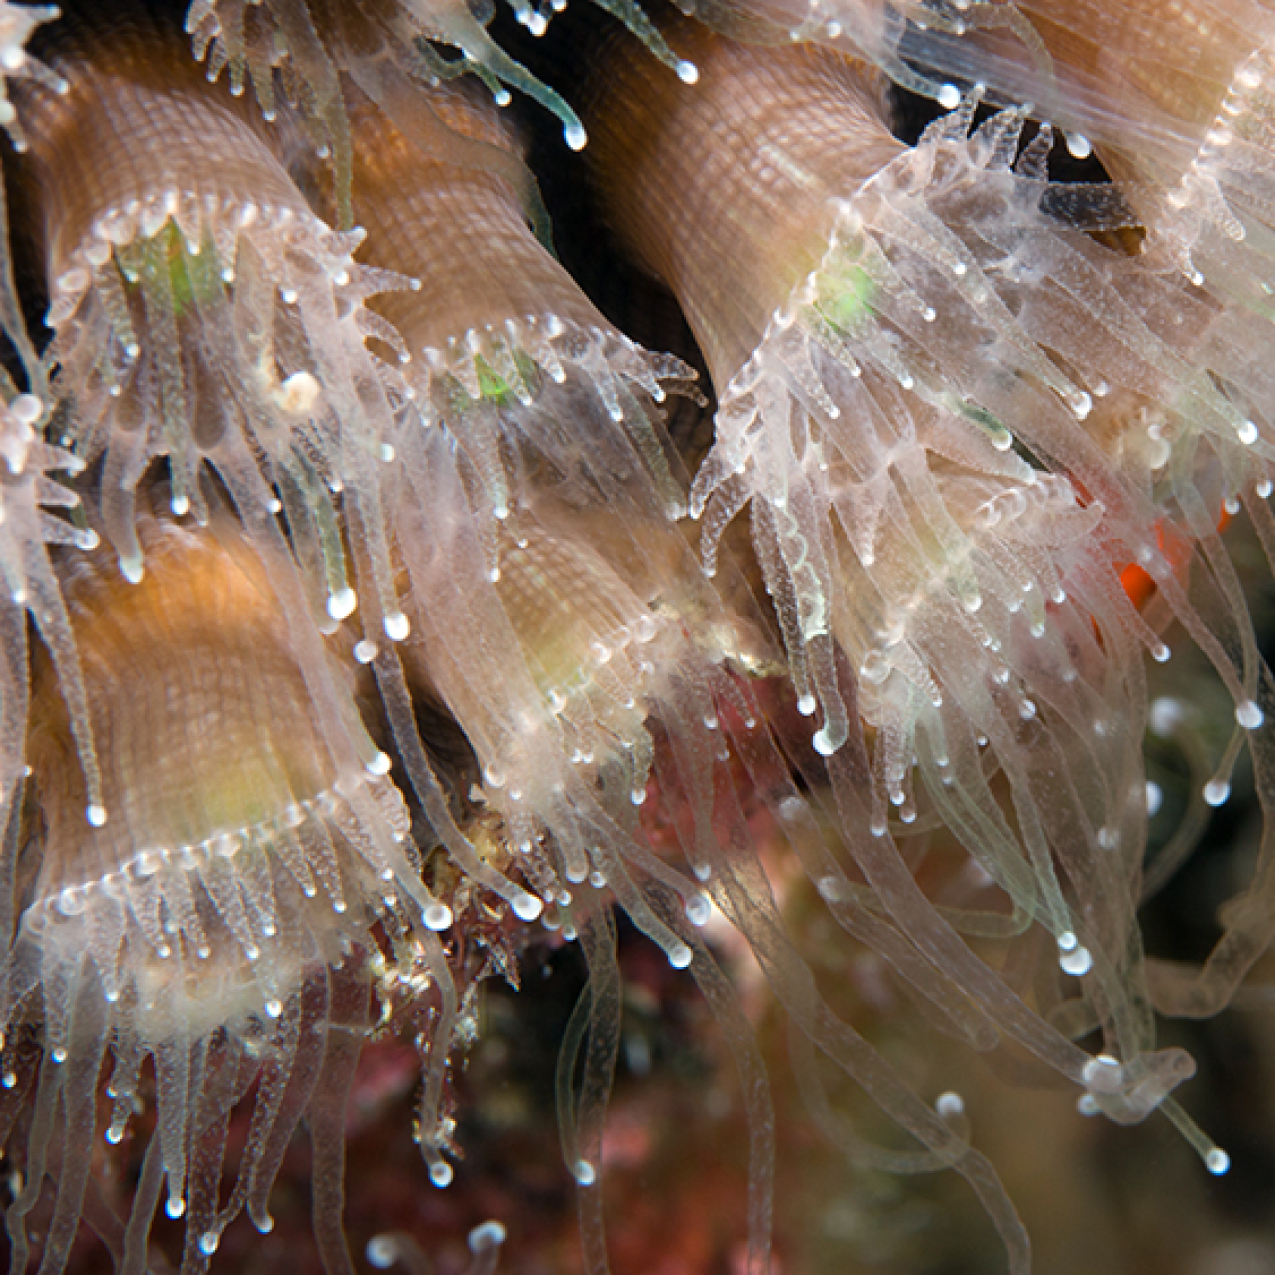 A close up of coral polyps, which look like tubes with small tentacles coming out around the top of the tube. The tentacles are slender and appear gelatinous and are nearly see-through and have rounded white tips.